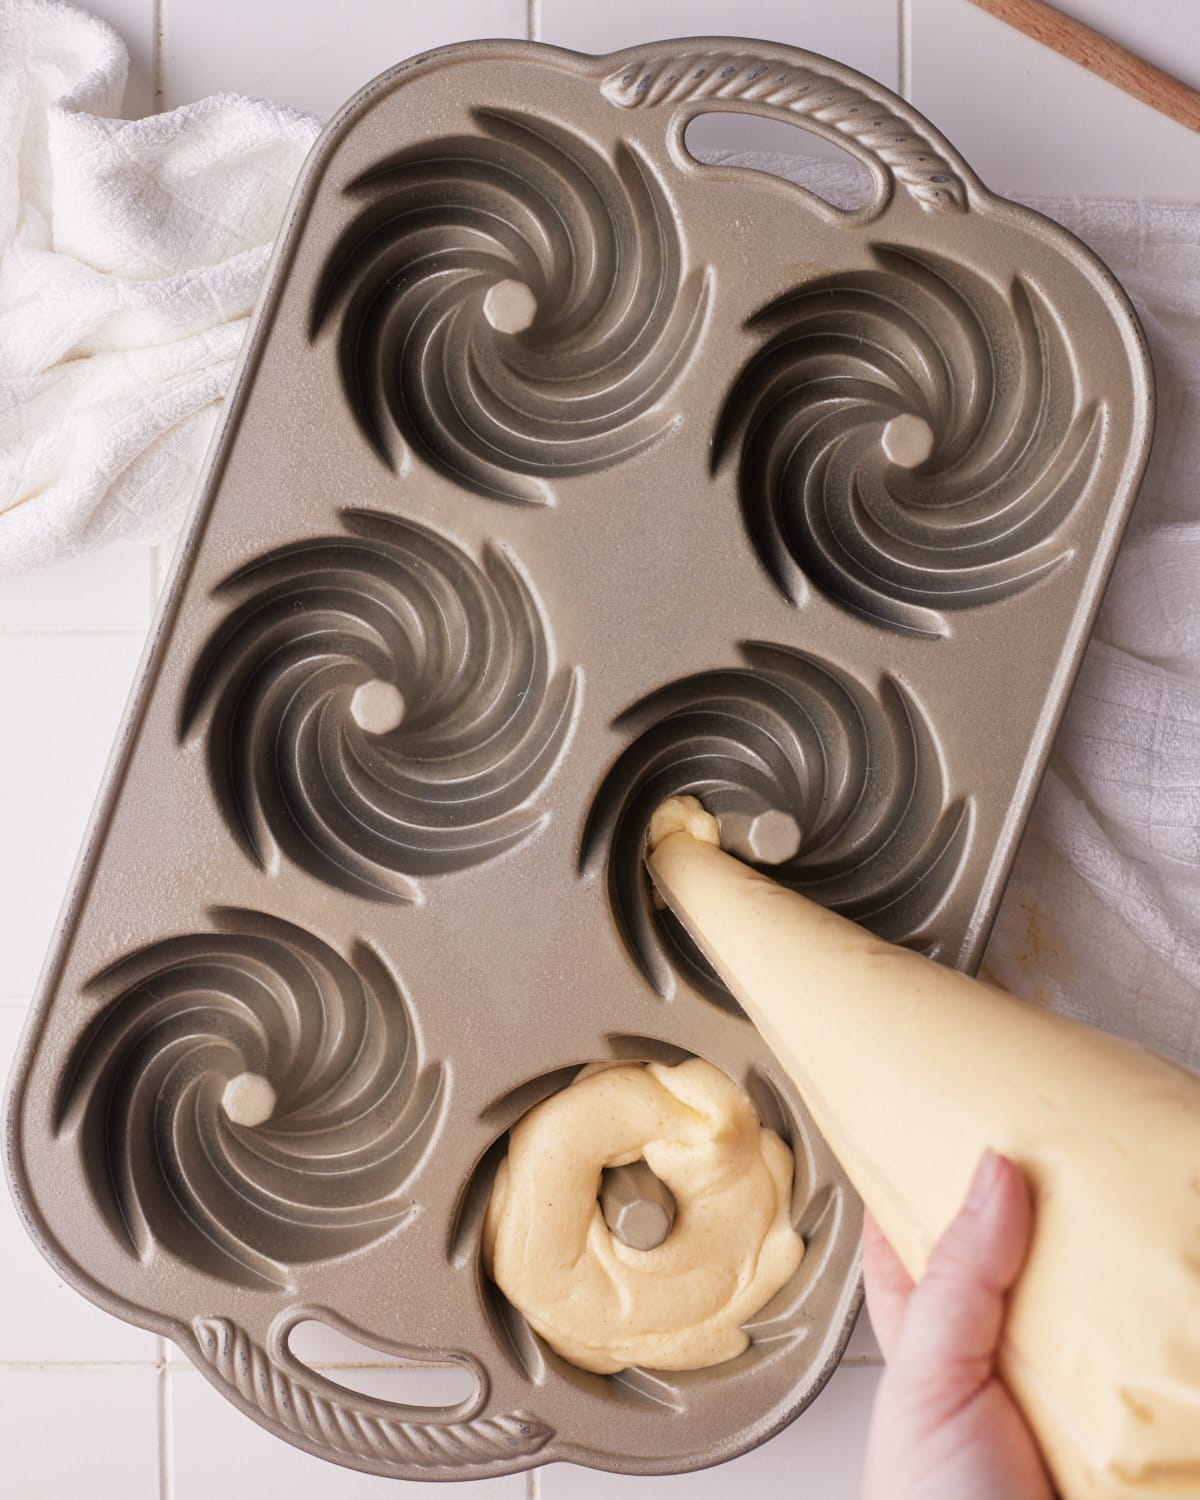 piping cake batter into a mini bundt cake mold.